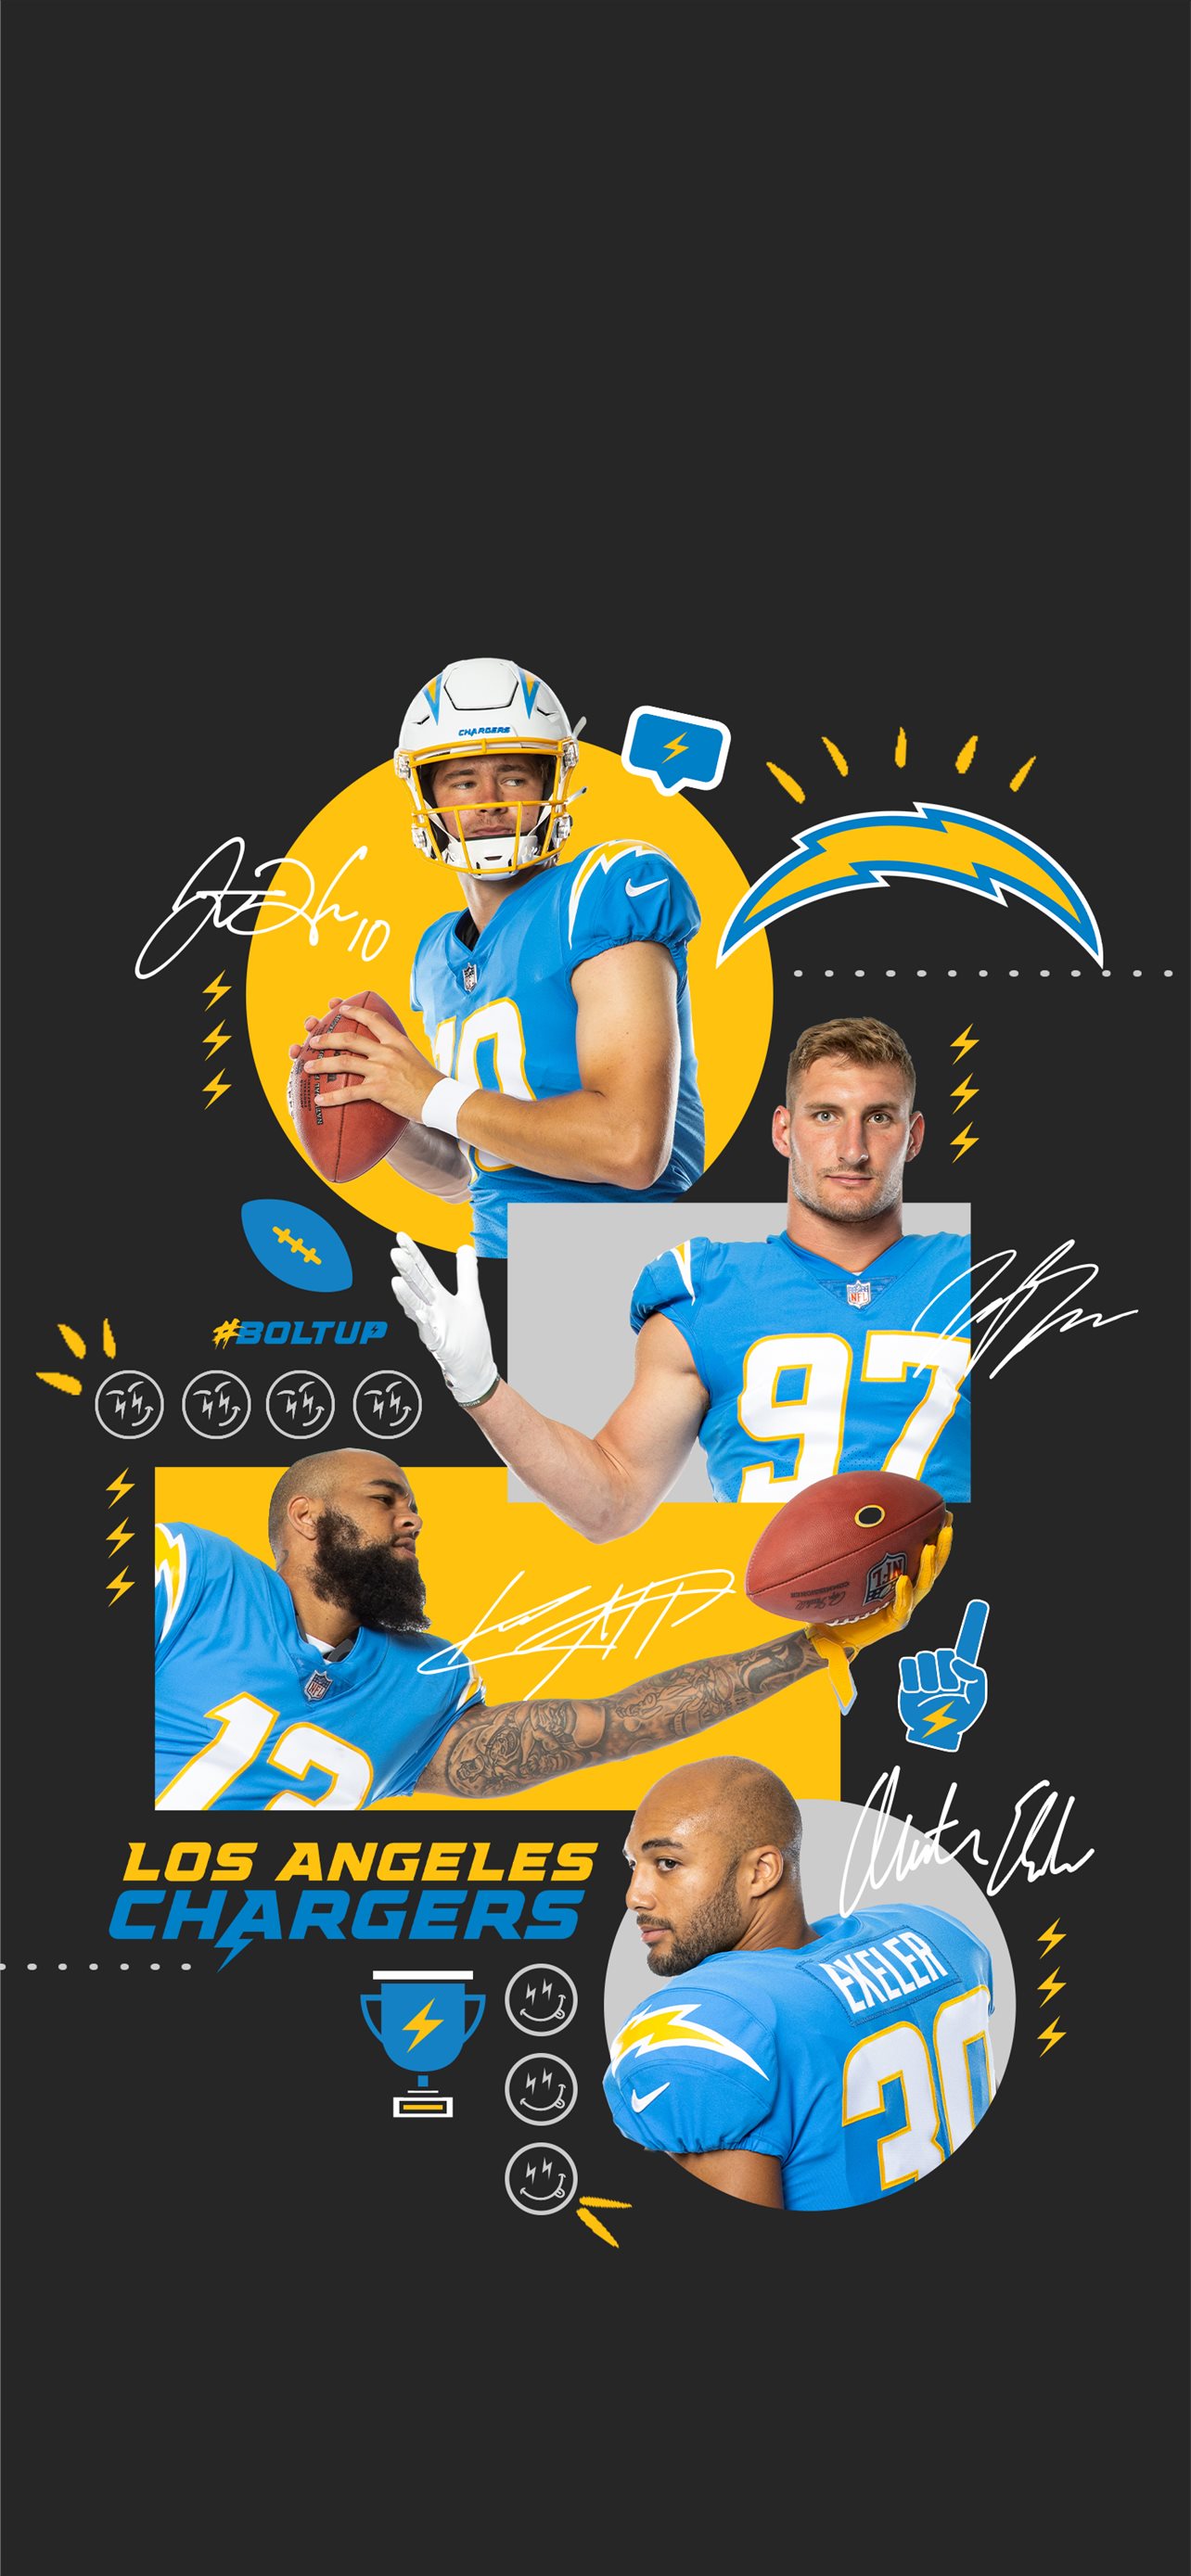 Los Angeles Chargers wallpaper  Los angeles chargers Los angeles chargers  logo Chargers football